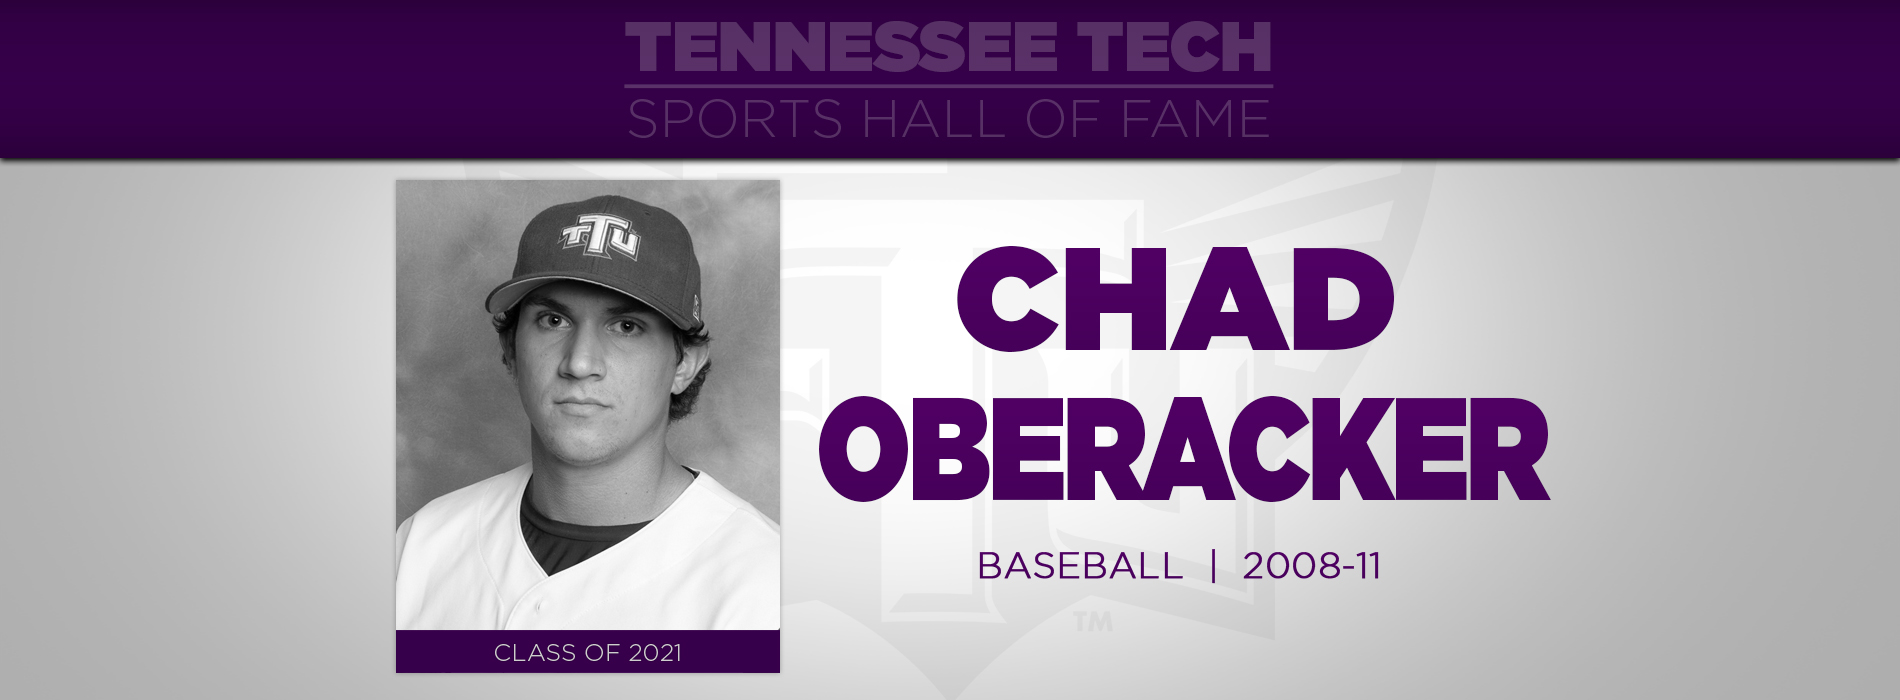 Oberacker to be inducted into TTU Sports Hall of Fame Friday night